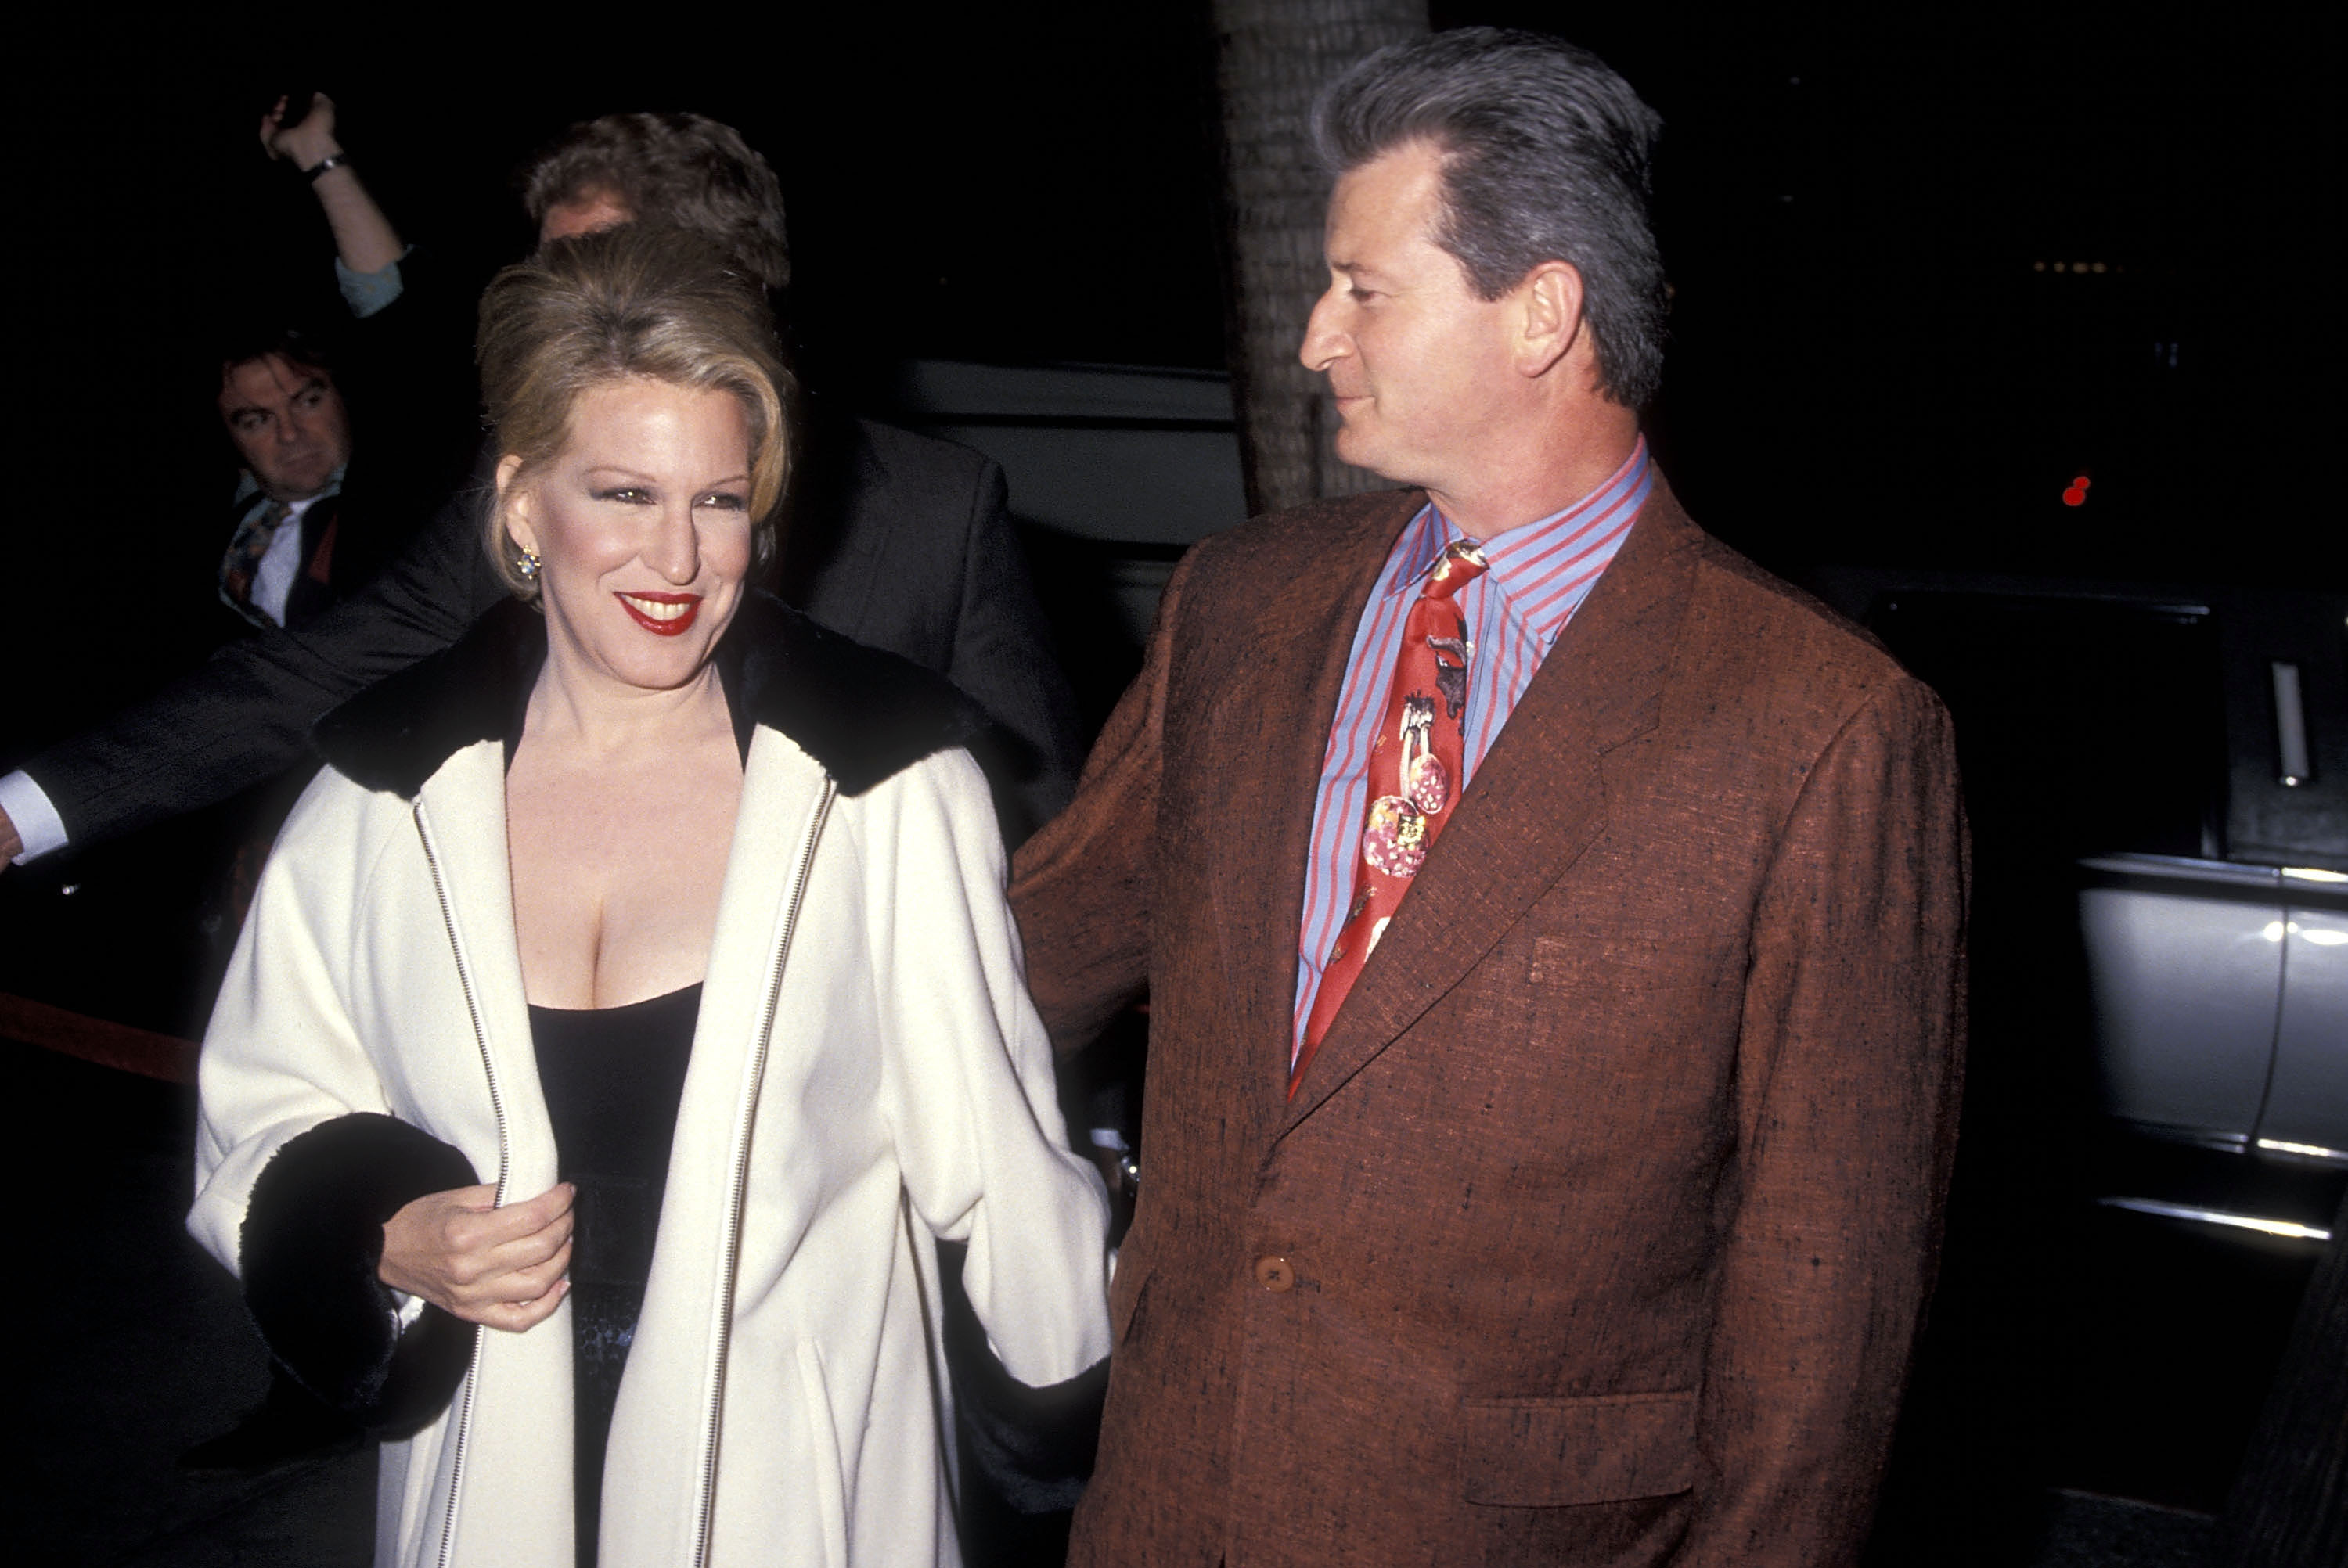 Bette Midler and husband Martin von Haselberg at the 'For the Boys' Beverly Hills premiere, November 14, 1991 | Source: Getty Images